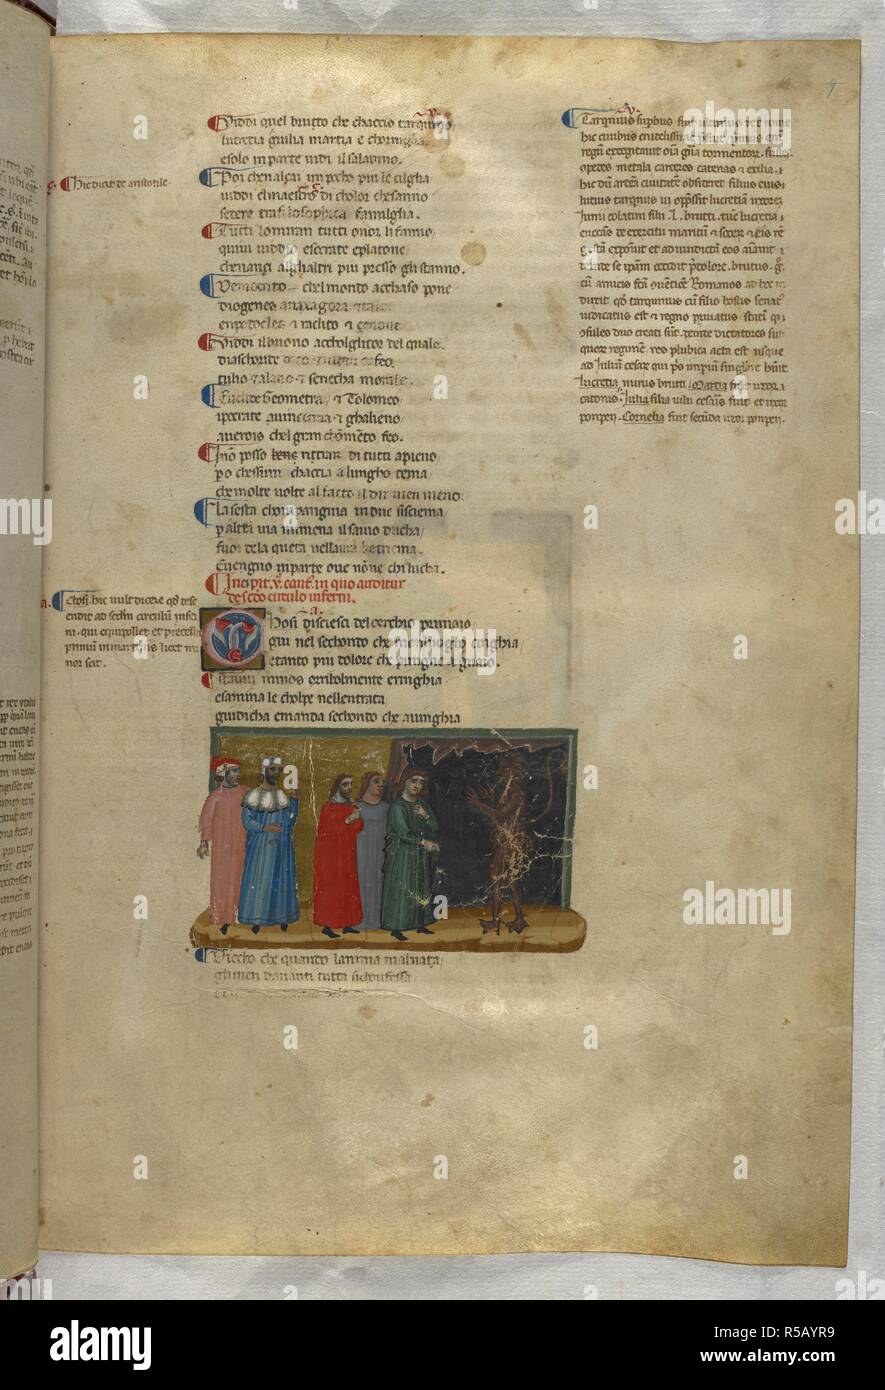 Inferno: Minos judging three souls. Dante Alighieri, Divina Commedia ( The Divine Comedy ), with a commentary in Latin. 1st half of the 14th century. Source: Egerton 943, f.10. Language: Italian, Latin. Stock Photo